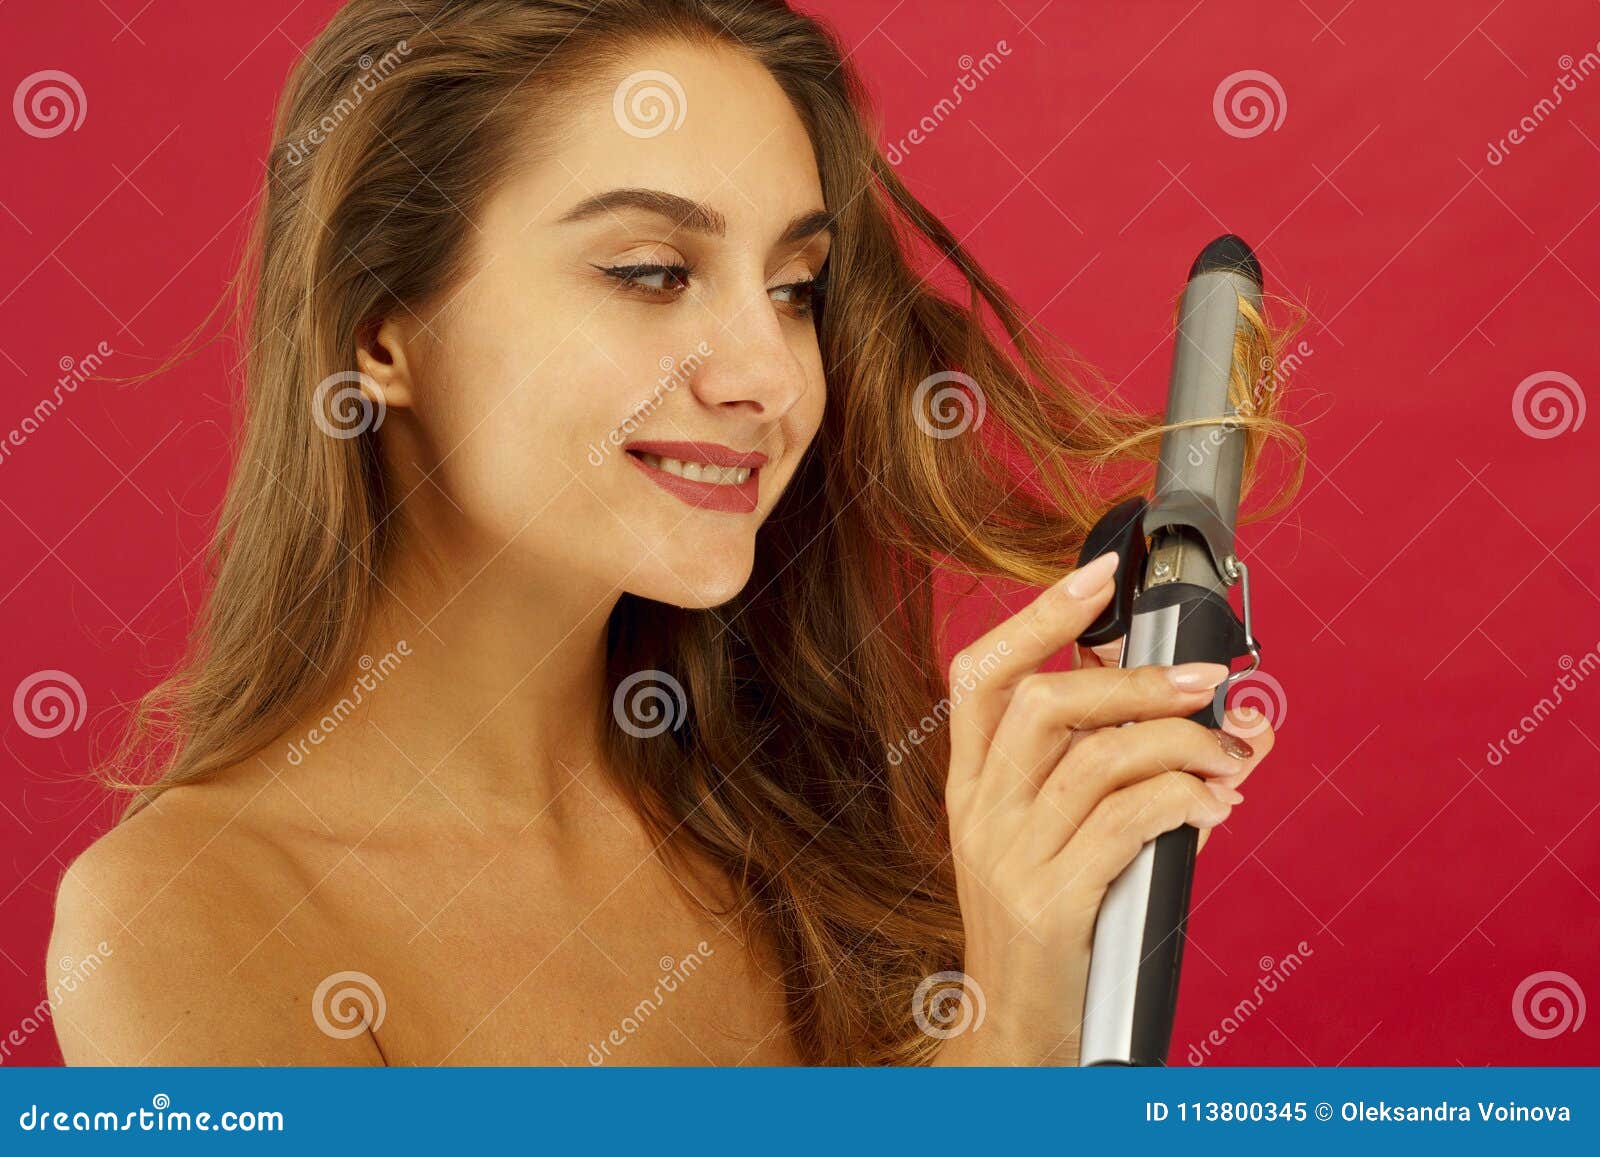 young smiley woman making curly hair by ploy over red background